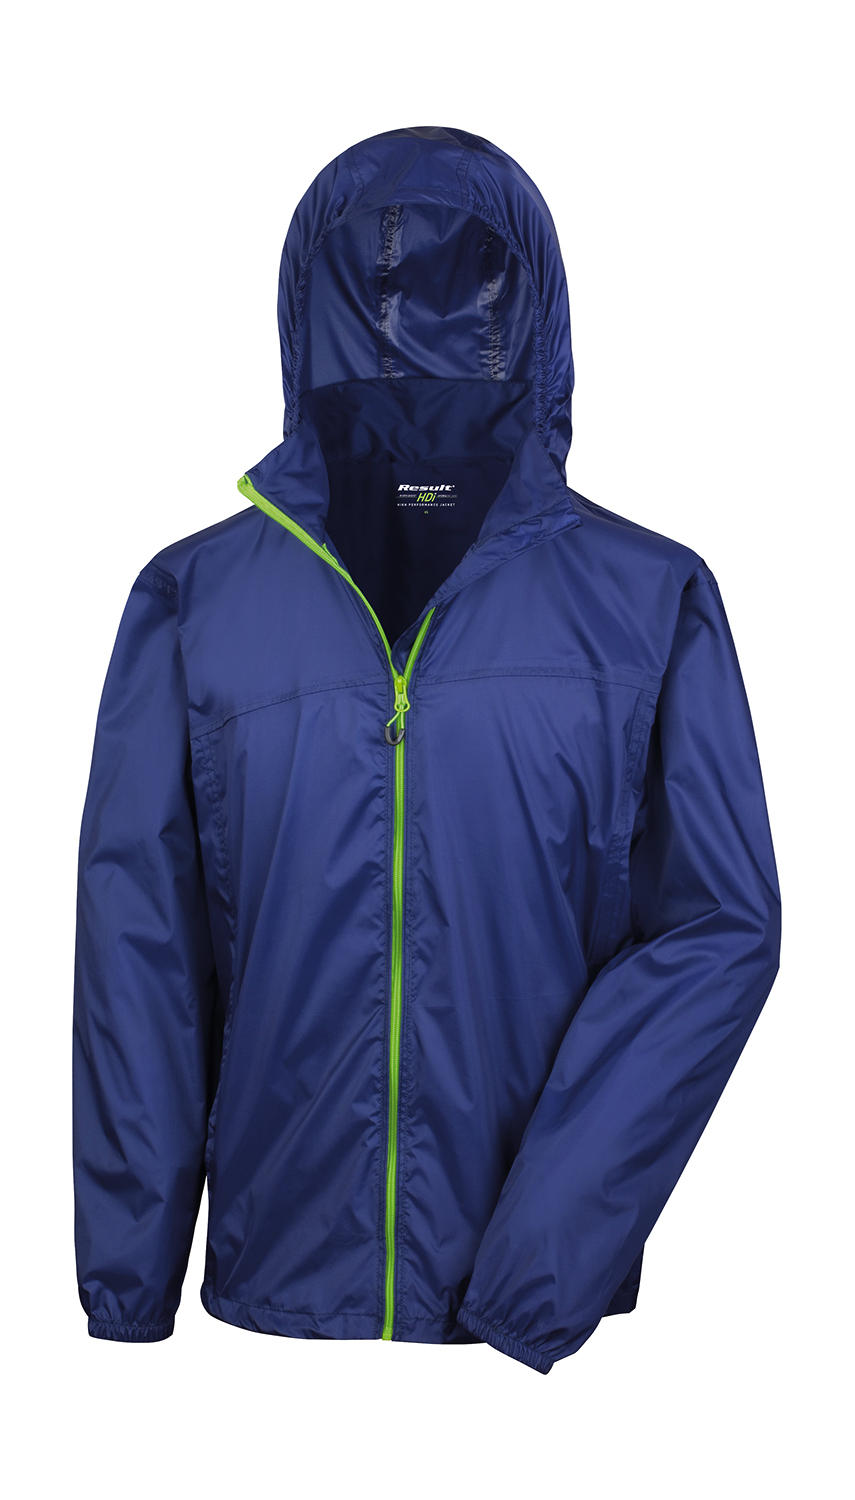  HDI Quest Lightweight Stowable Jacket in Farbe Navy/Lime